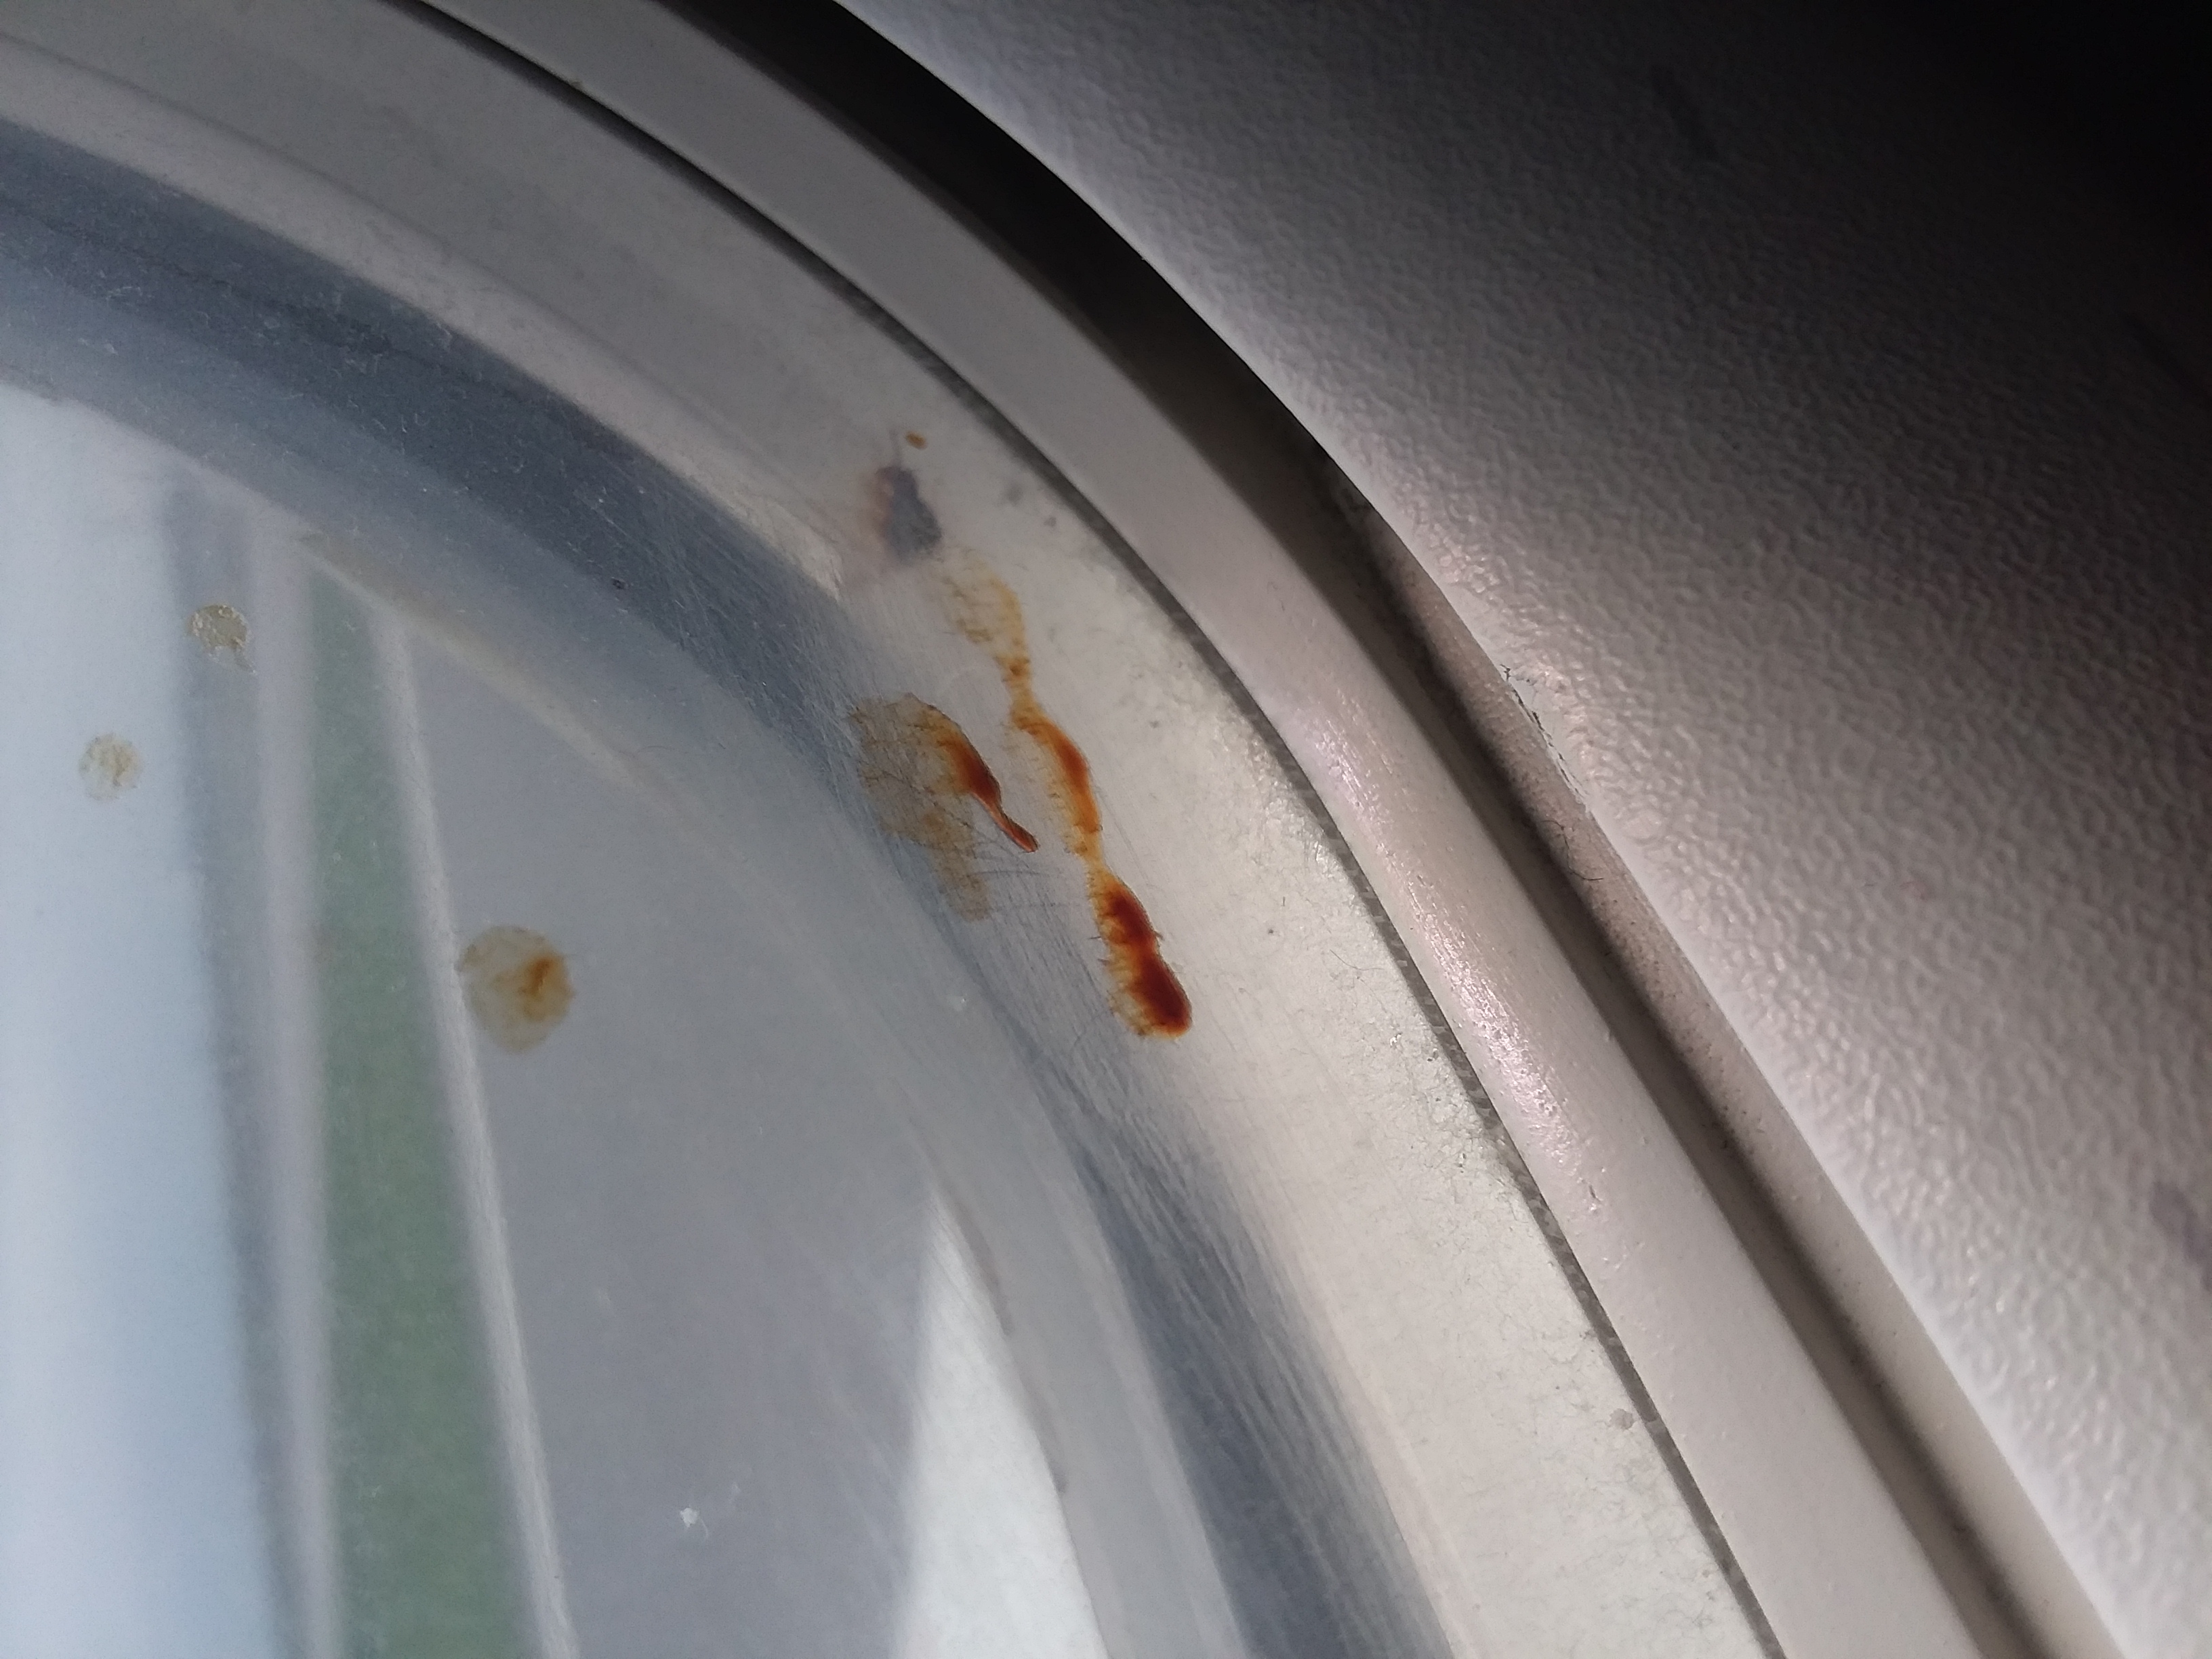 Airline Window Snot